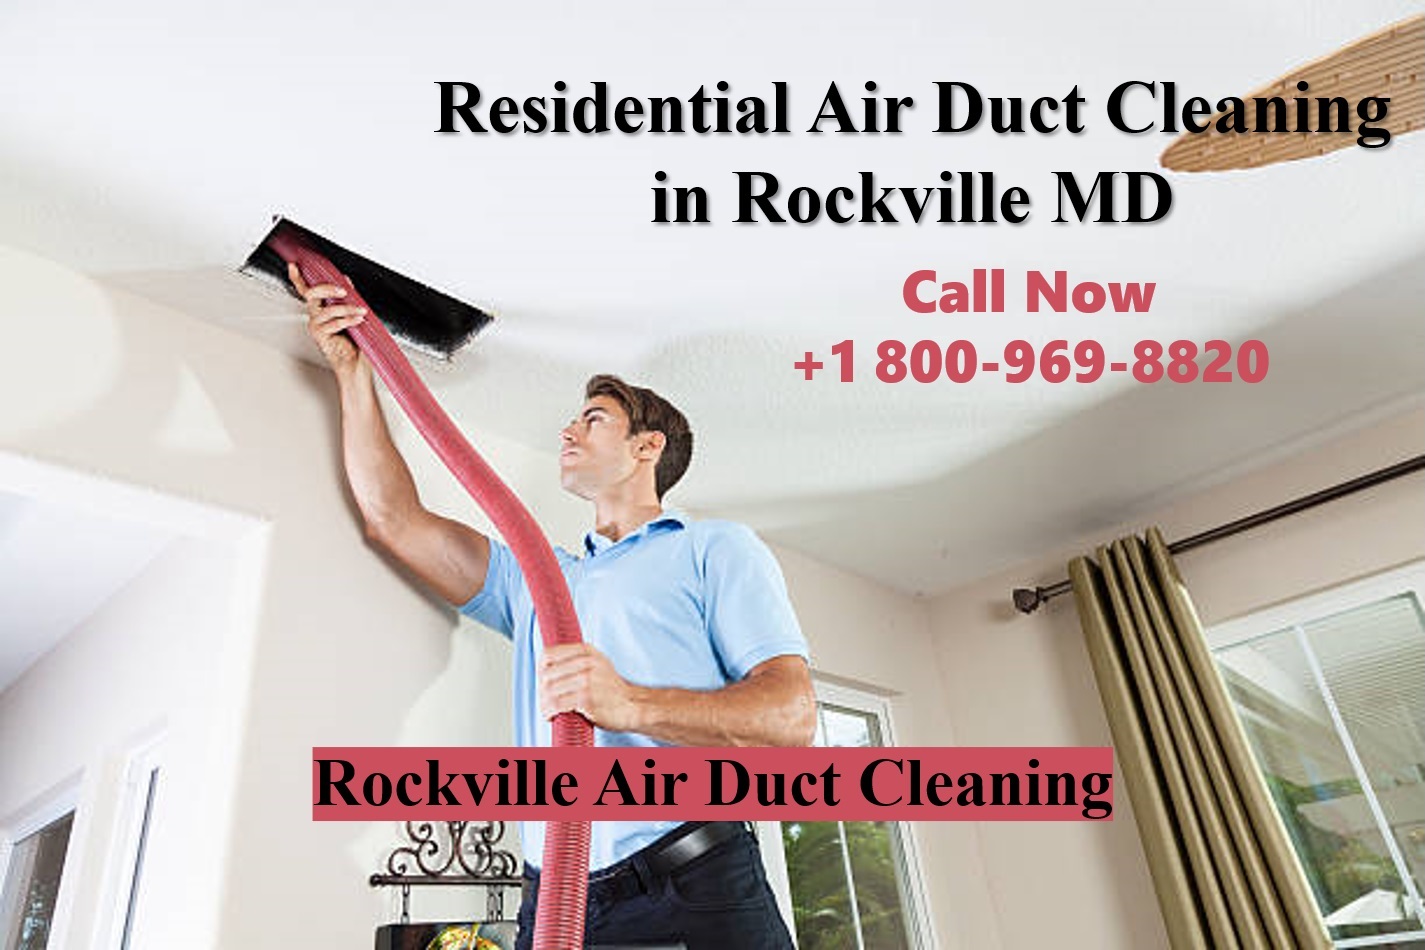 Residential Air Duct Cleaning in Rockville MD